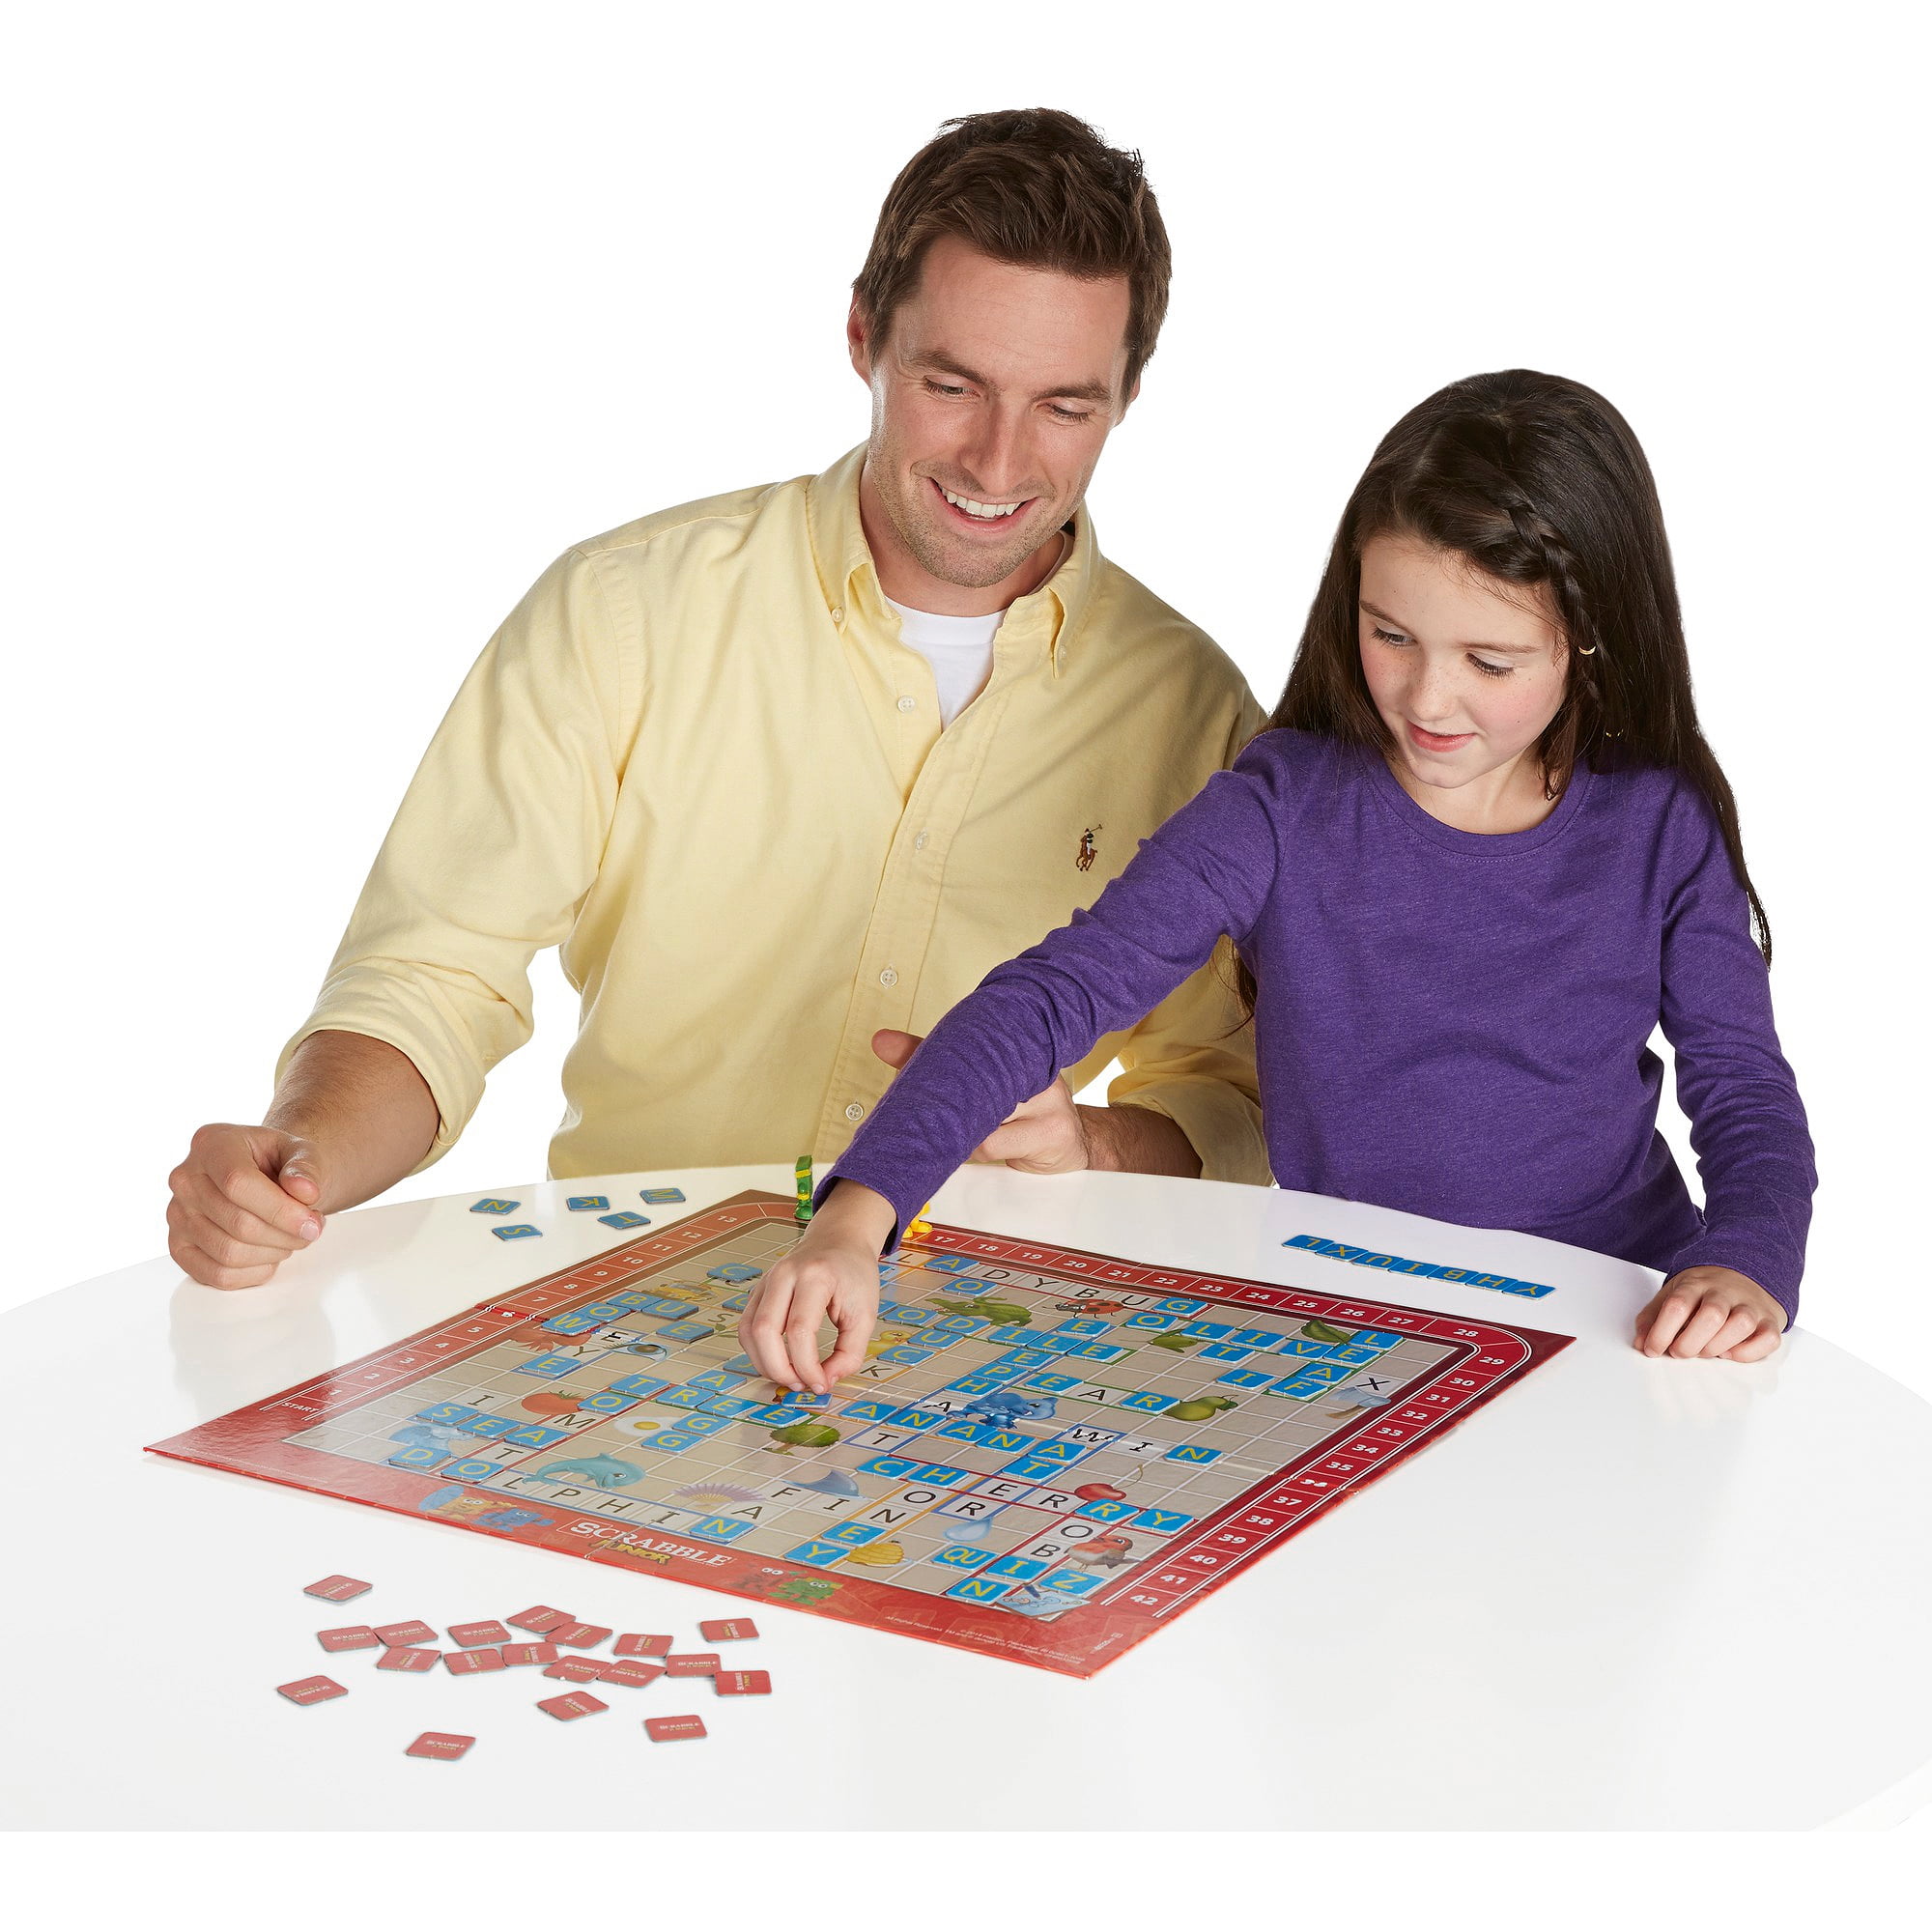 Scrabble Junior Game, Board Game for Kids Ages 5 and Up, for 2-4 Players